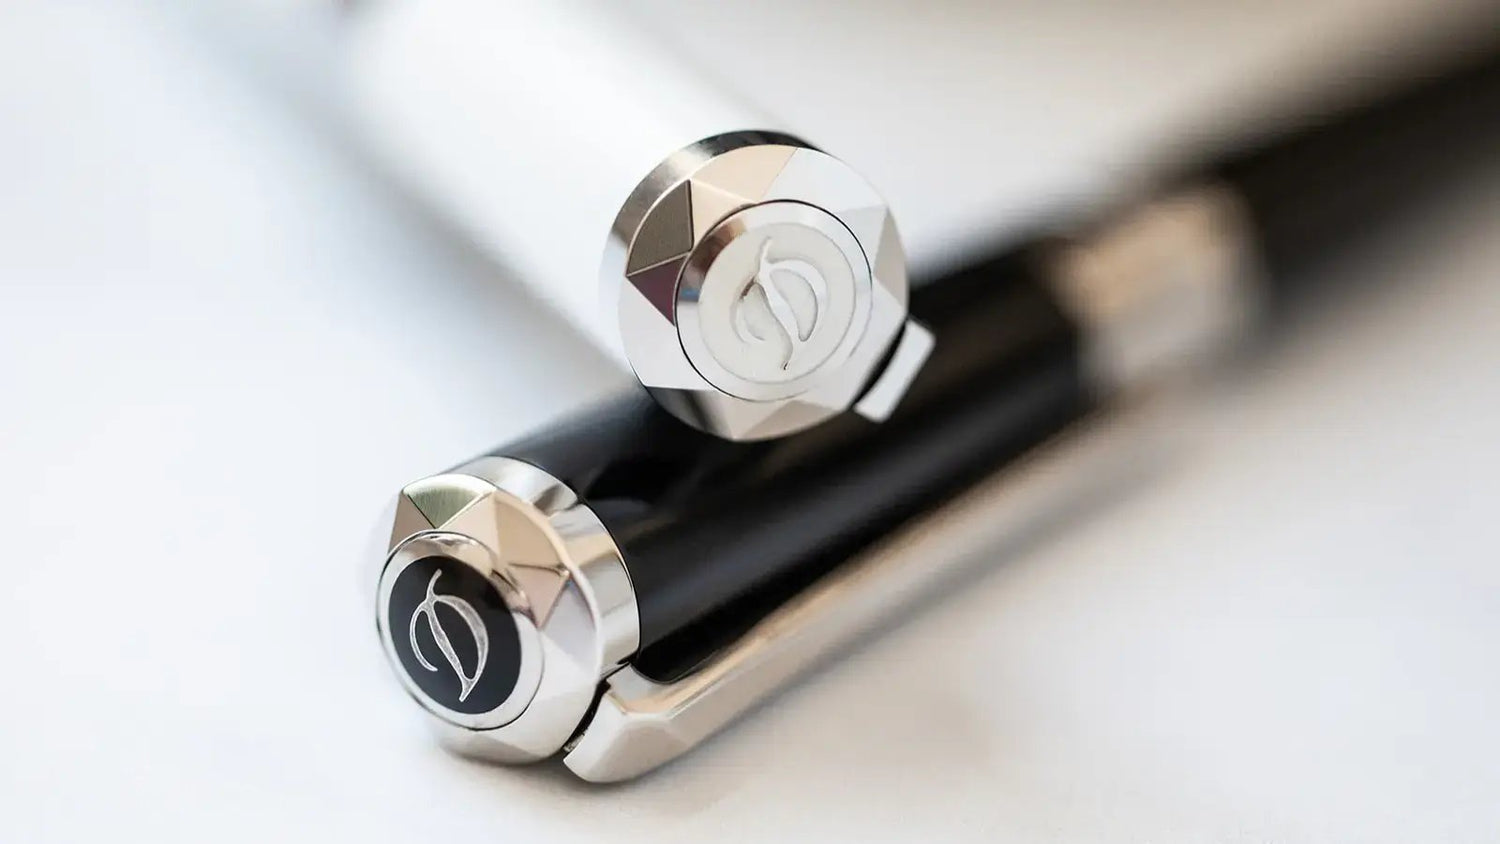 S.T. Dupont Liberte pens in white lacquer and black lacquer with palladium finish